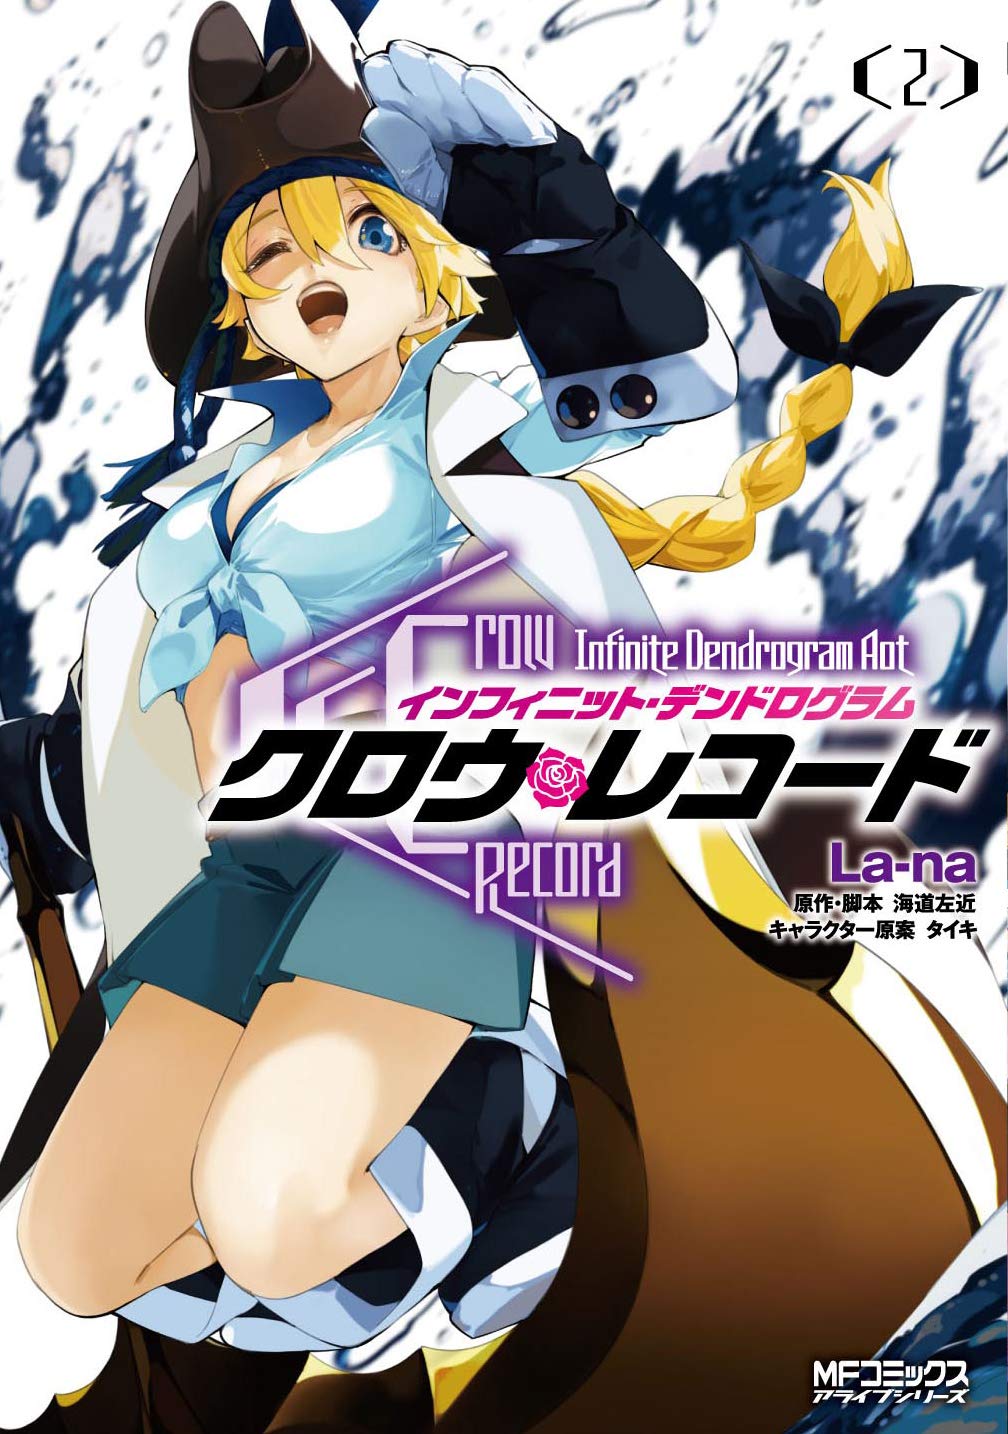 Read Crow Record: Infinite Dendrogram Another 7 - Oni Scan